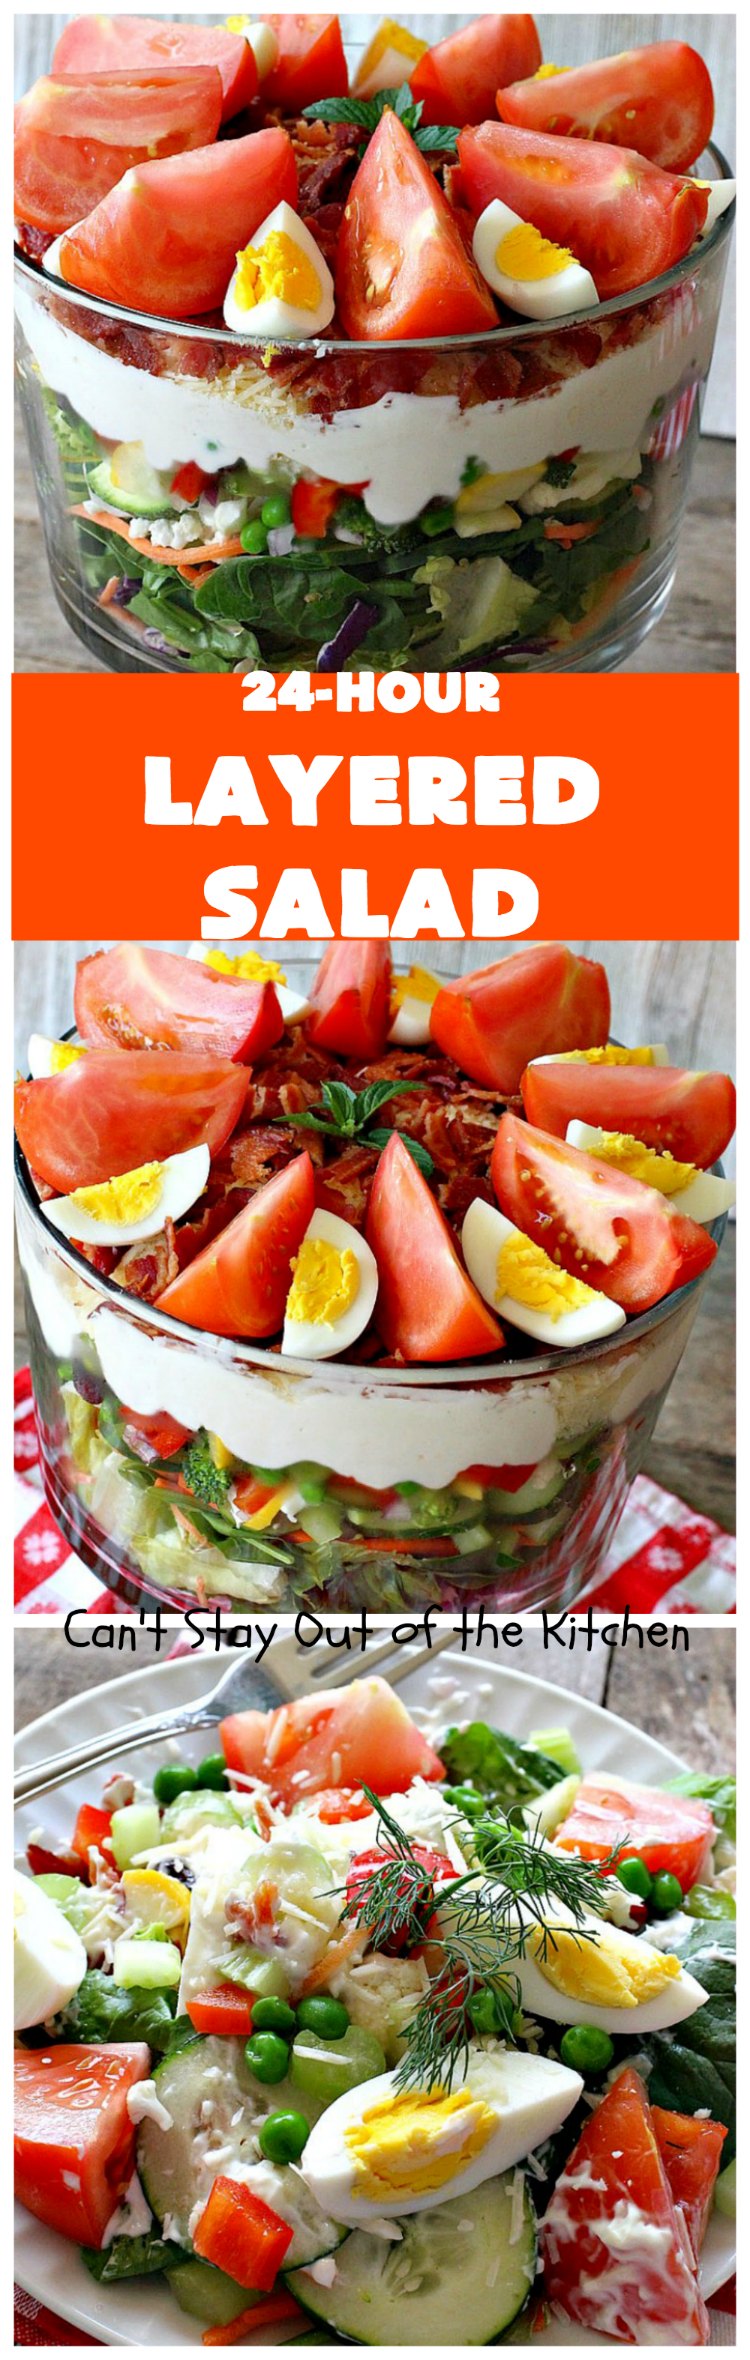 24-Hour Layered Salad | Can't Stay Out of the Kitchen